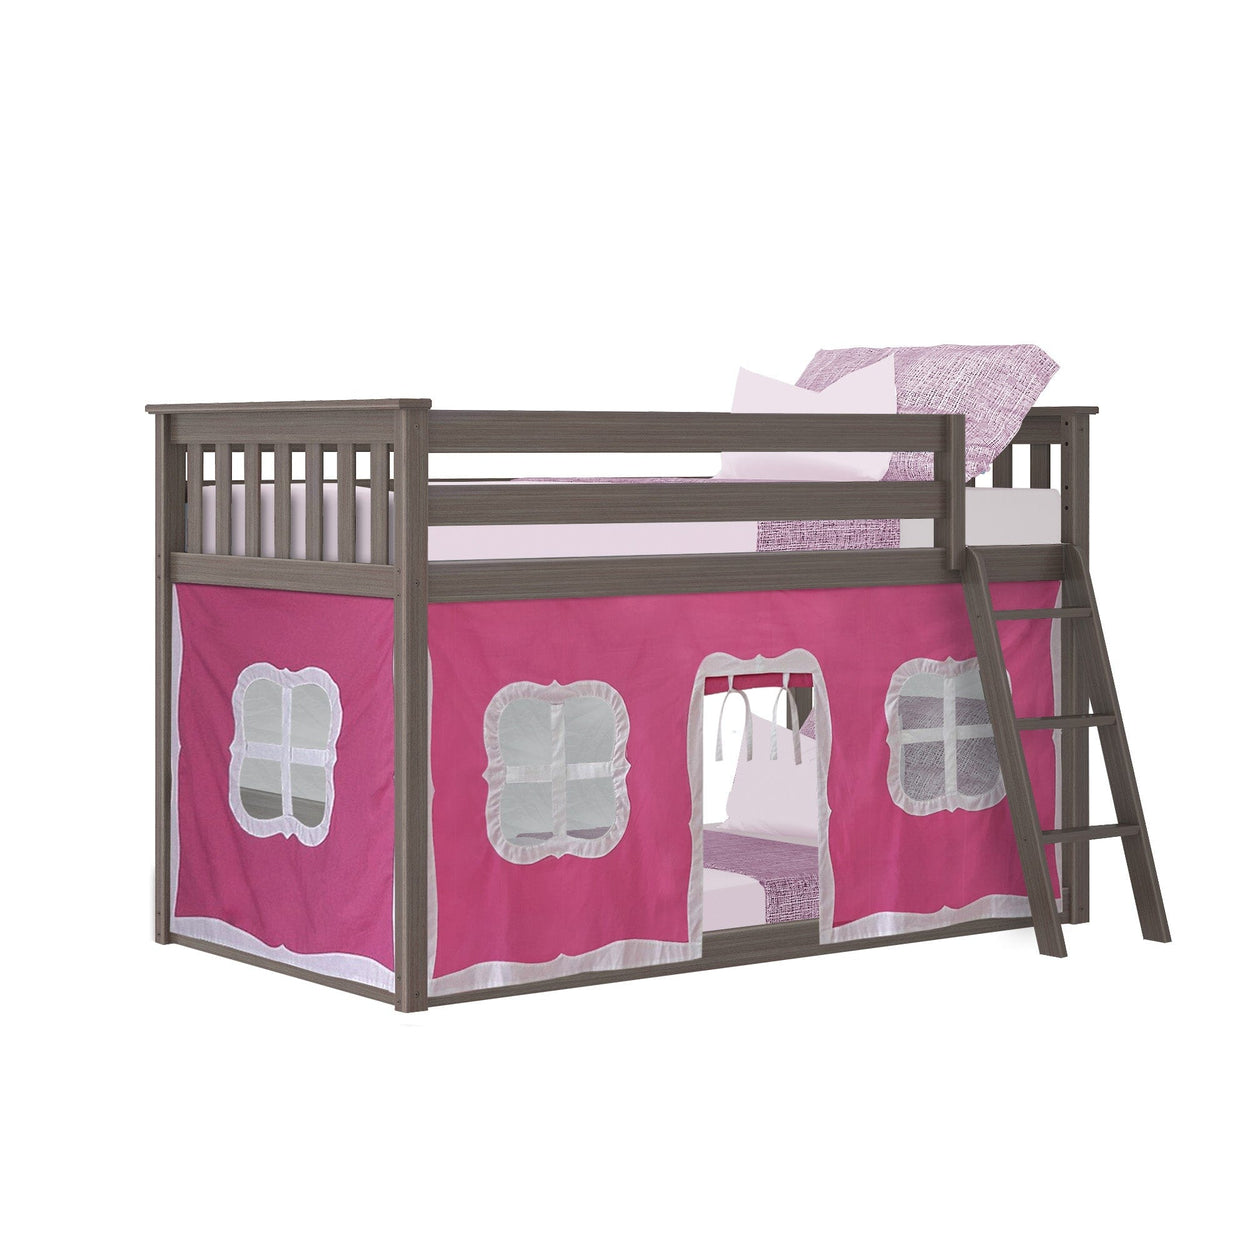 180214151078 : Bunk Beds Twin-Size Low Bunk Bed With Curtain, Clay + Pink